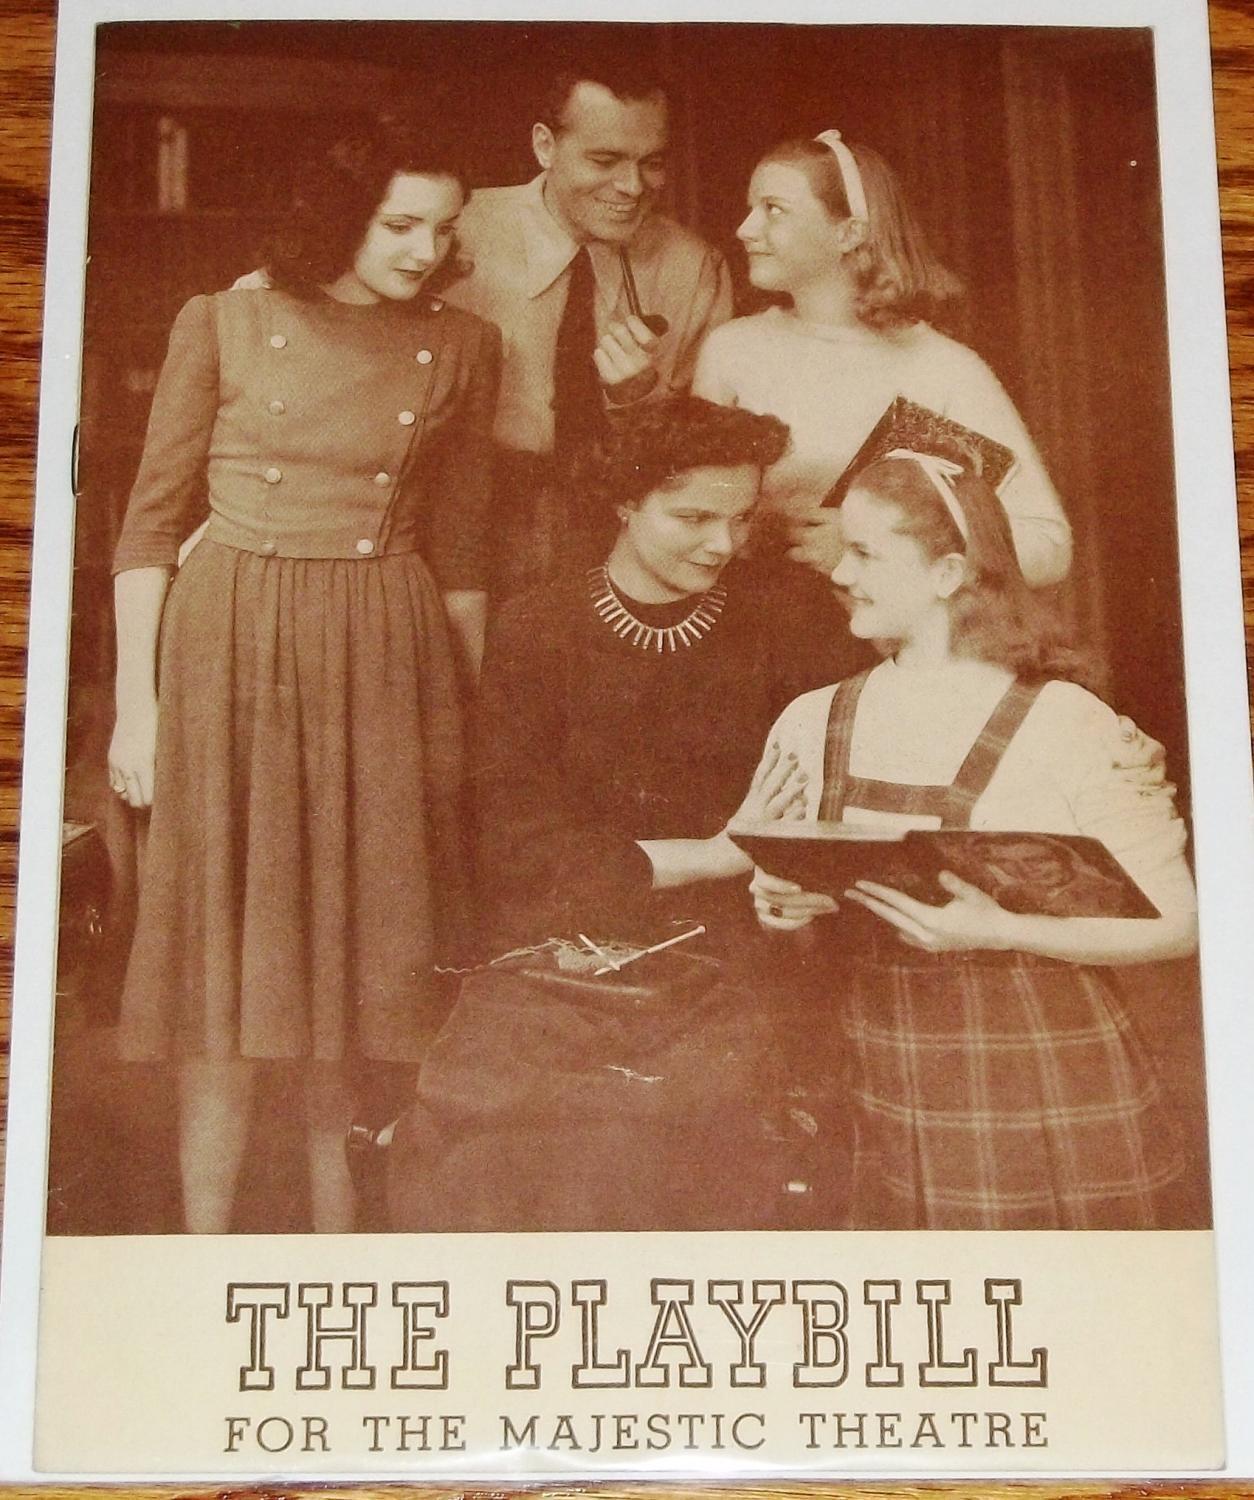 Jerome Chodorov Sally Benson / JUNIOR MISS THE PLAYBILL FOR THE MAJESTIC THEATRE